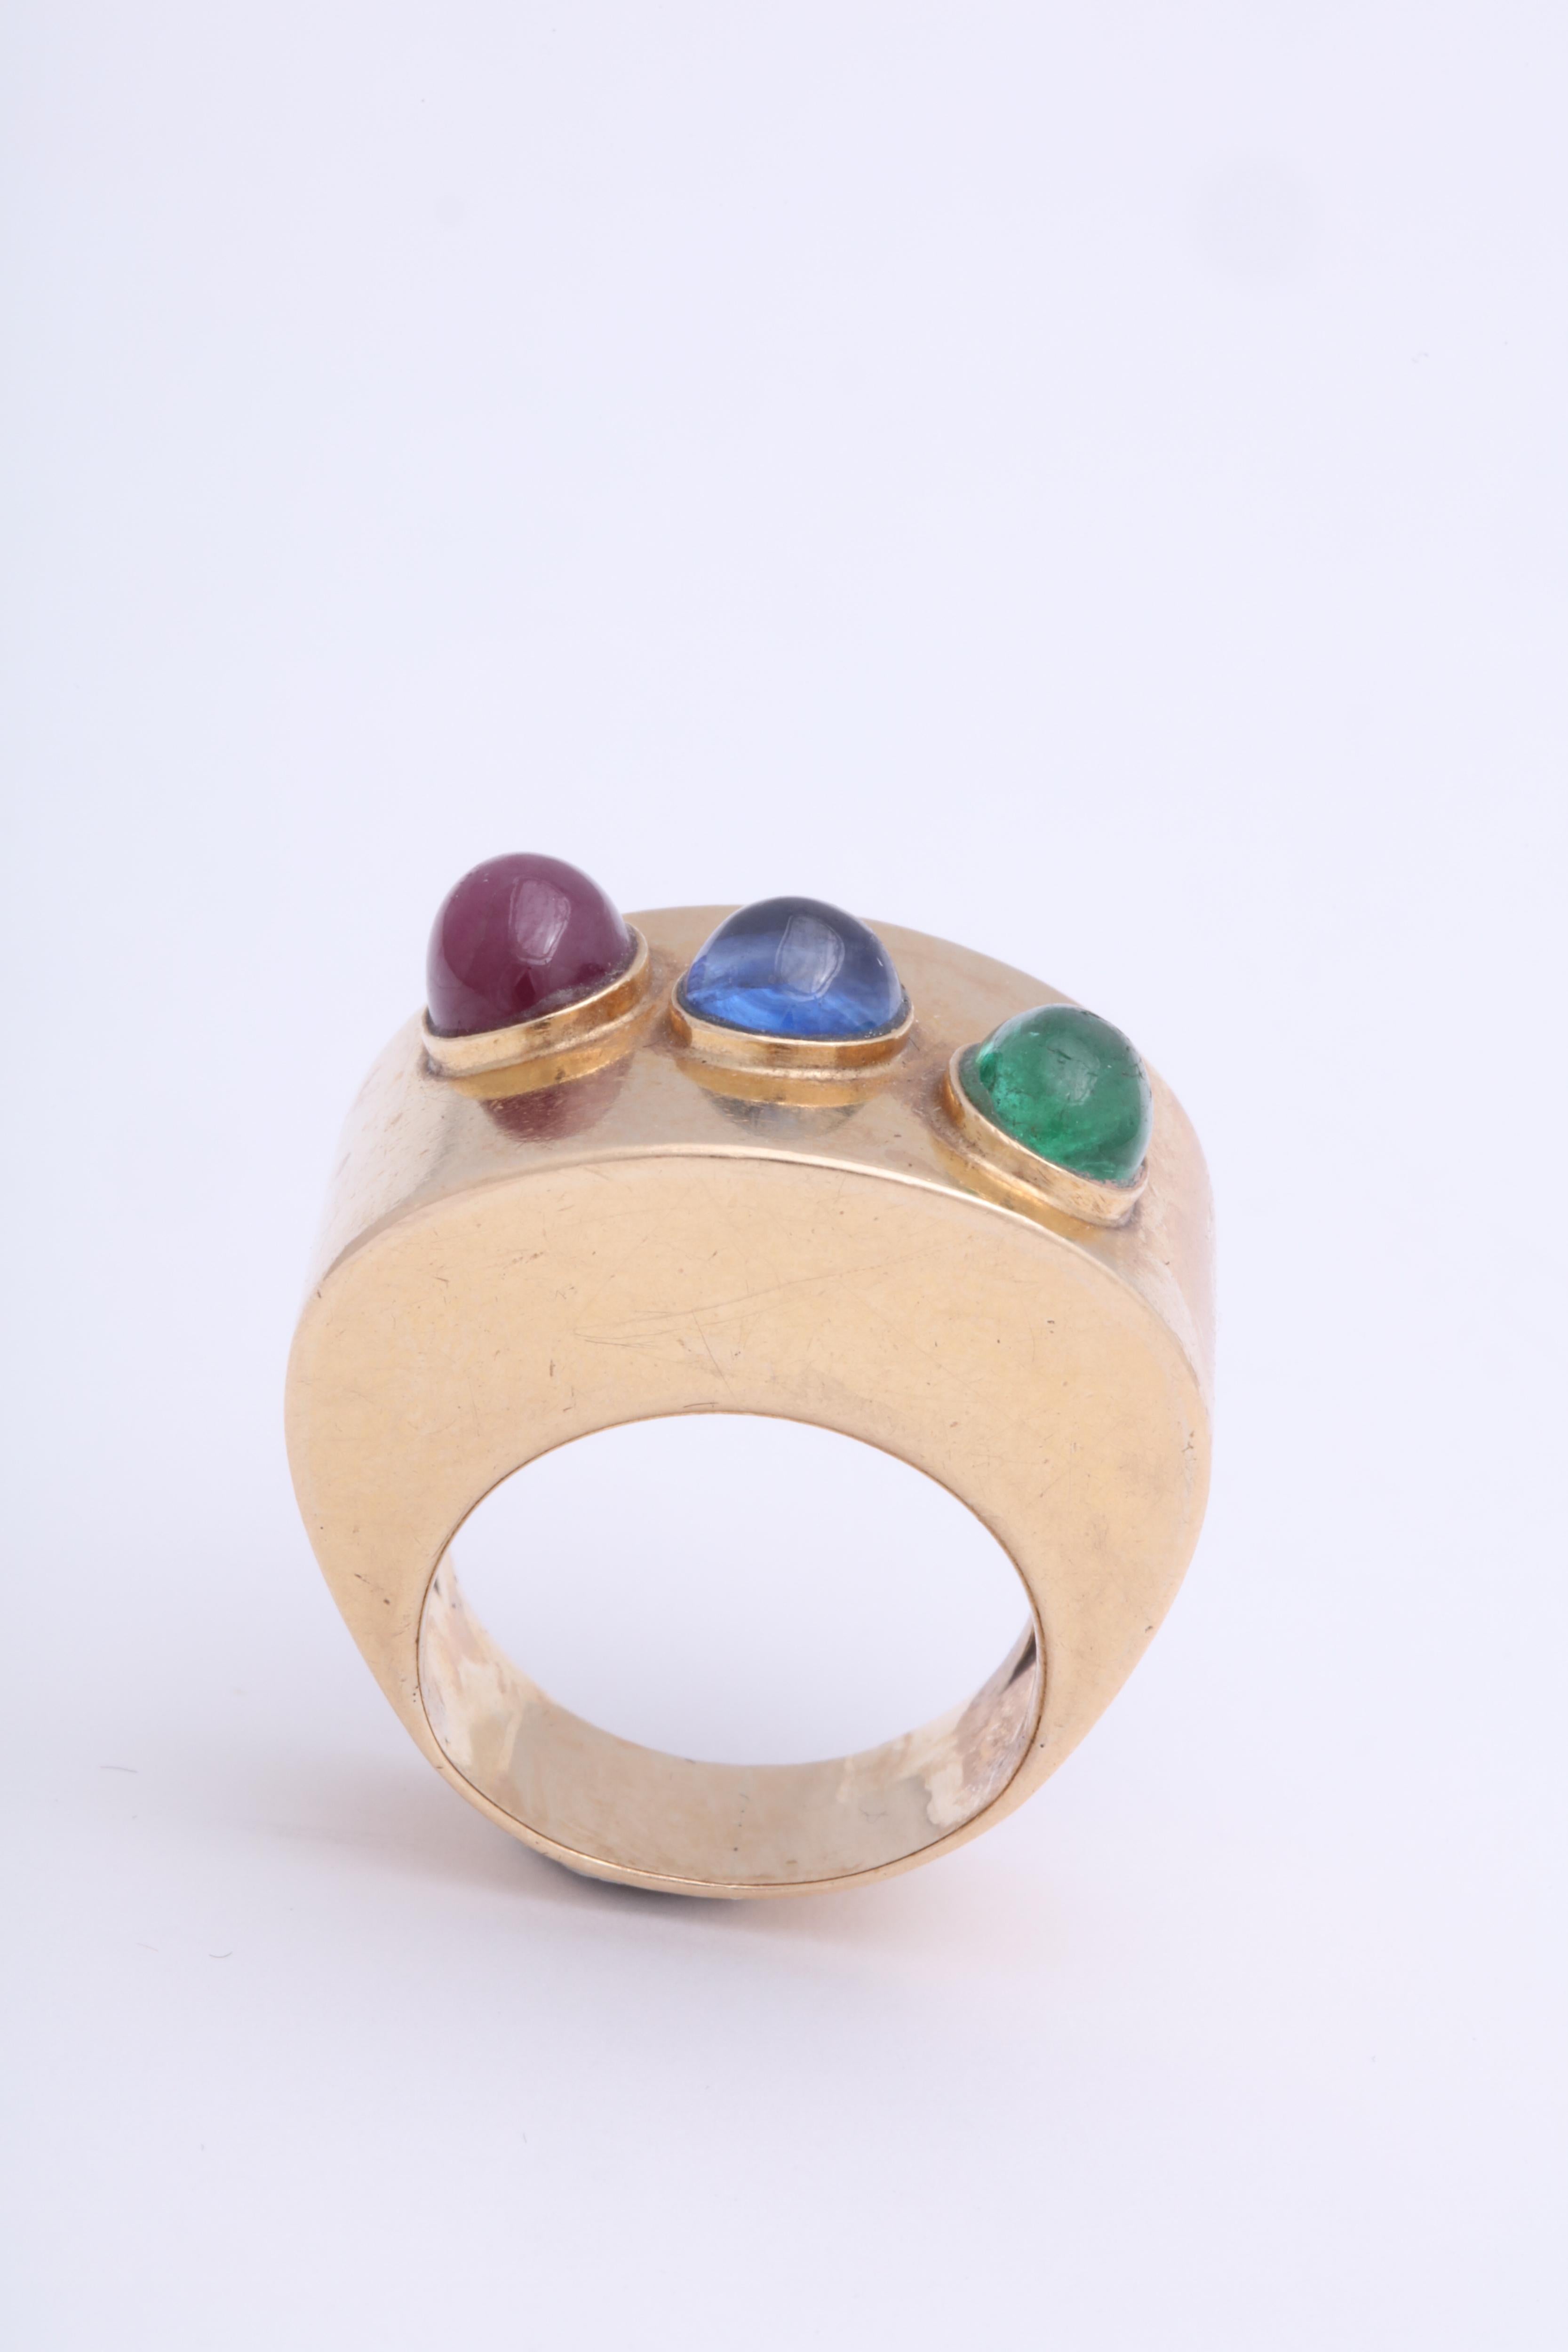 Retro Wide Band with Cabochon Ruby, Sapphire and Emerald Ring For Sale 2